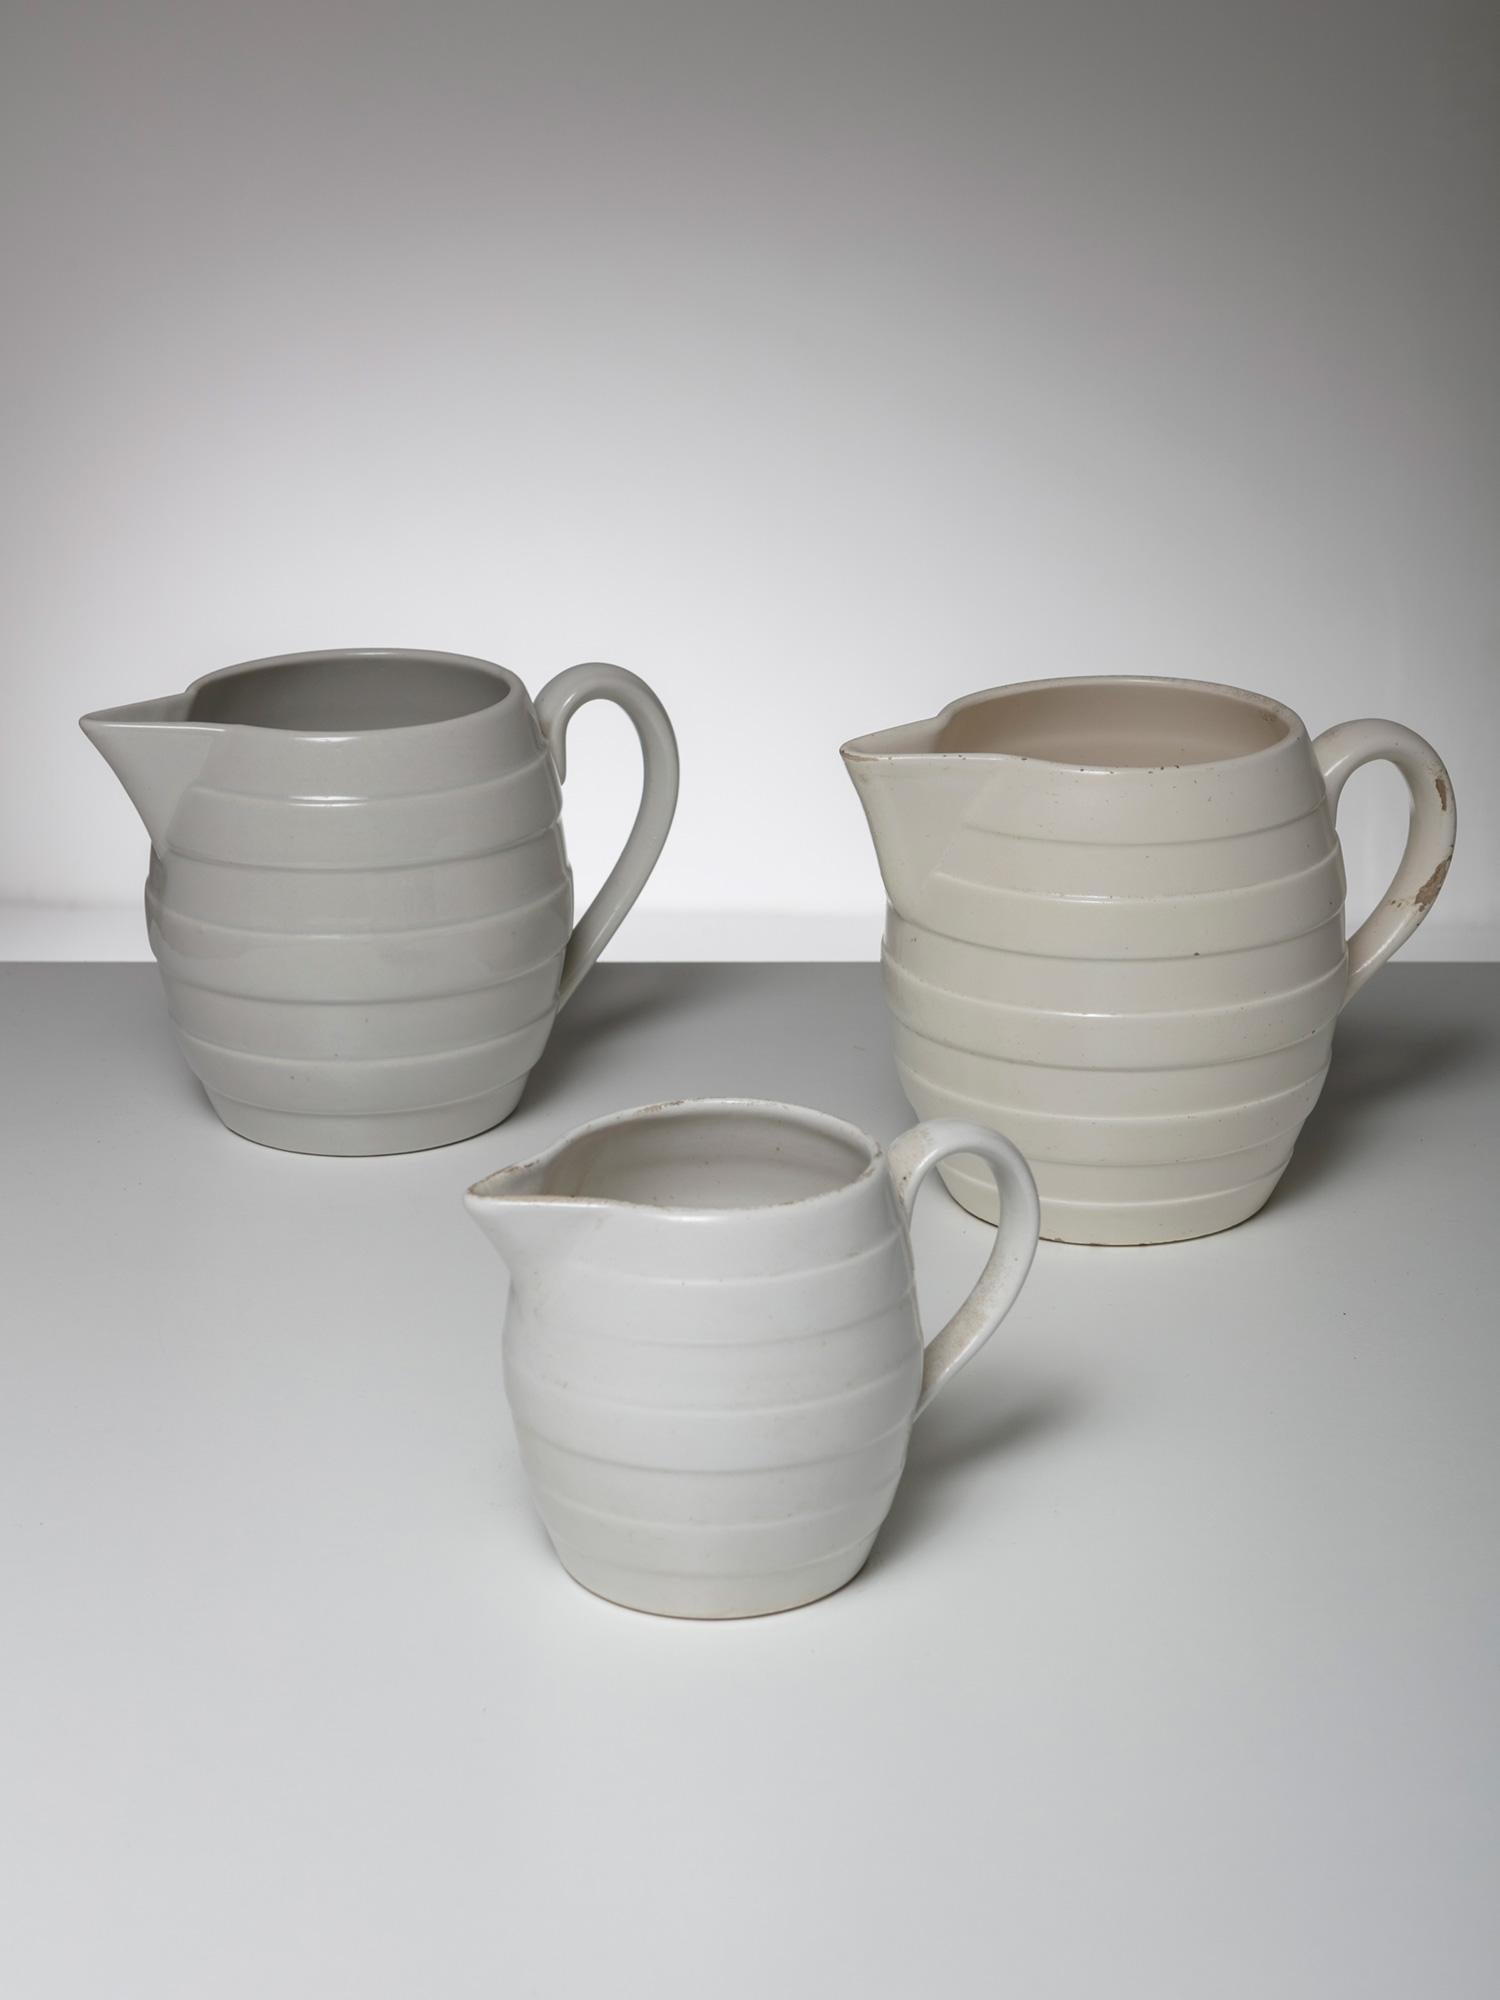 Graceful set of three pitchers by Guido Andloviz for SCI Laveno.
Each piece comes with a slight different color and surface finish.